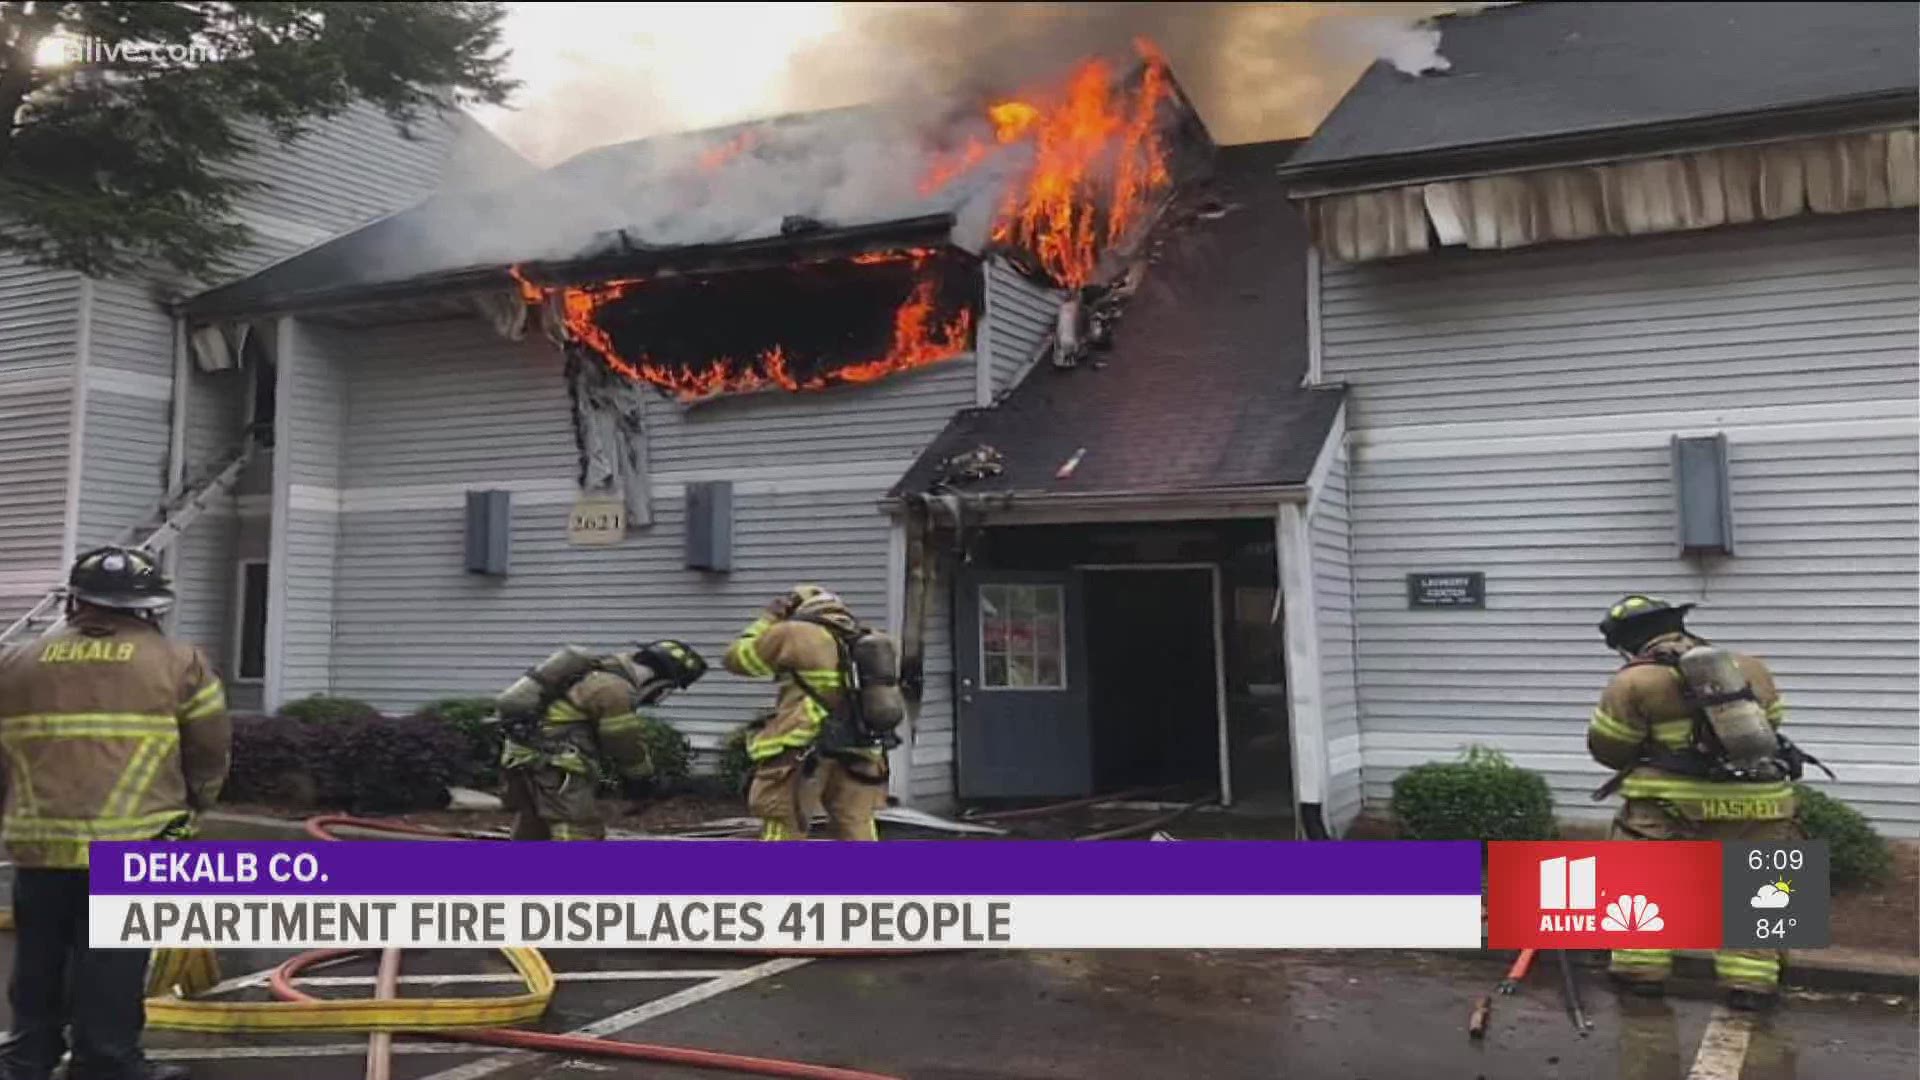 The fire happened around 8 a.m. at apartments off of Buford Highway in DeKalb County